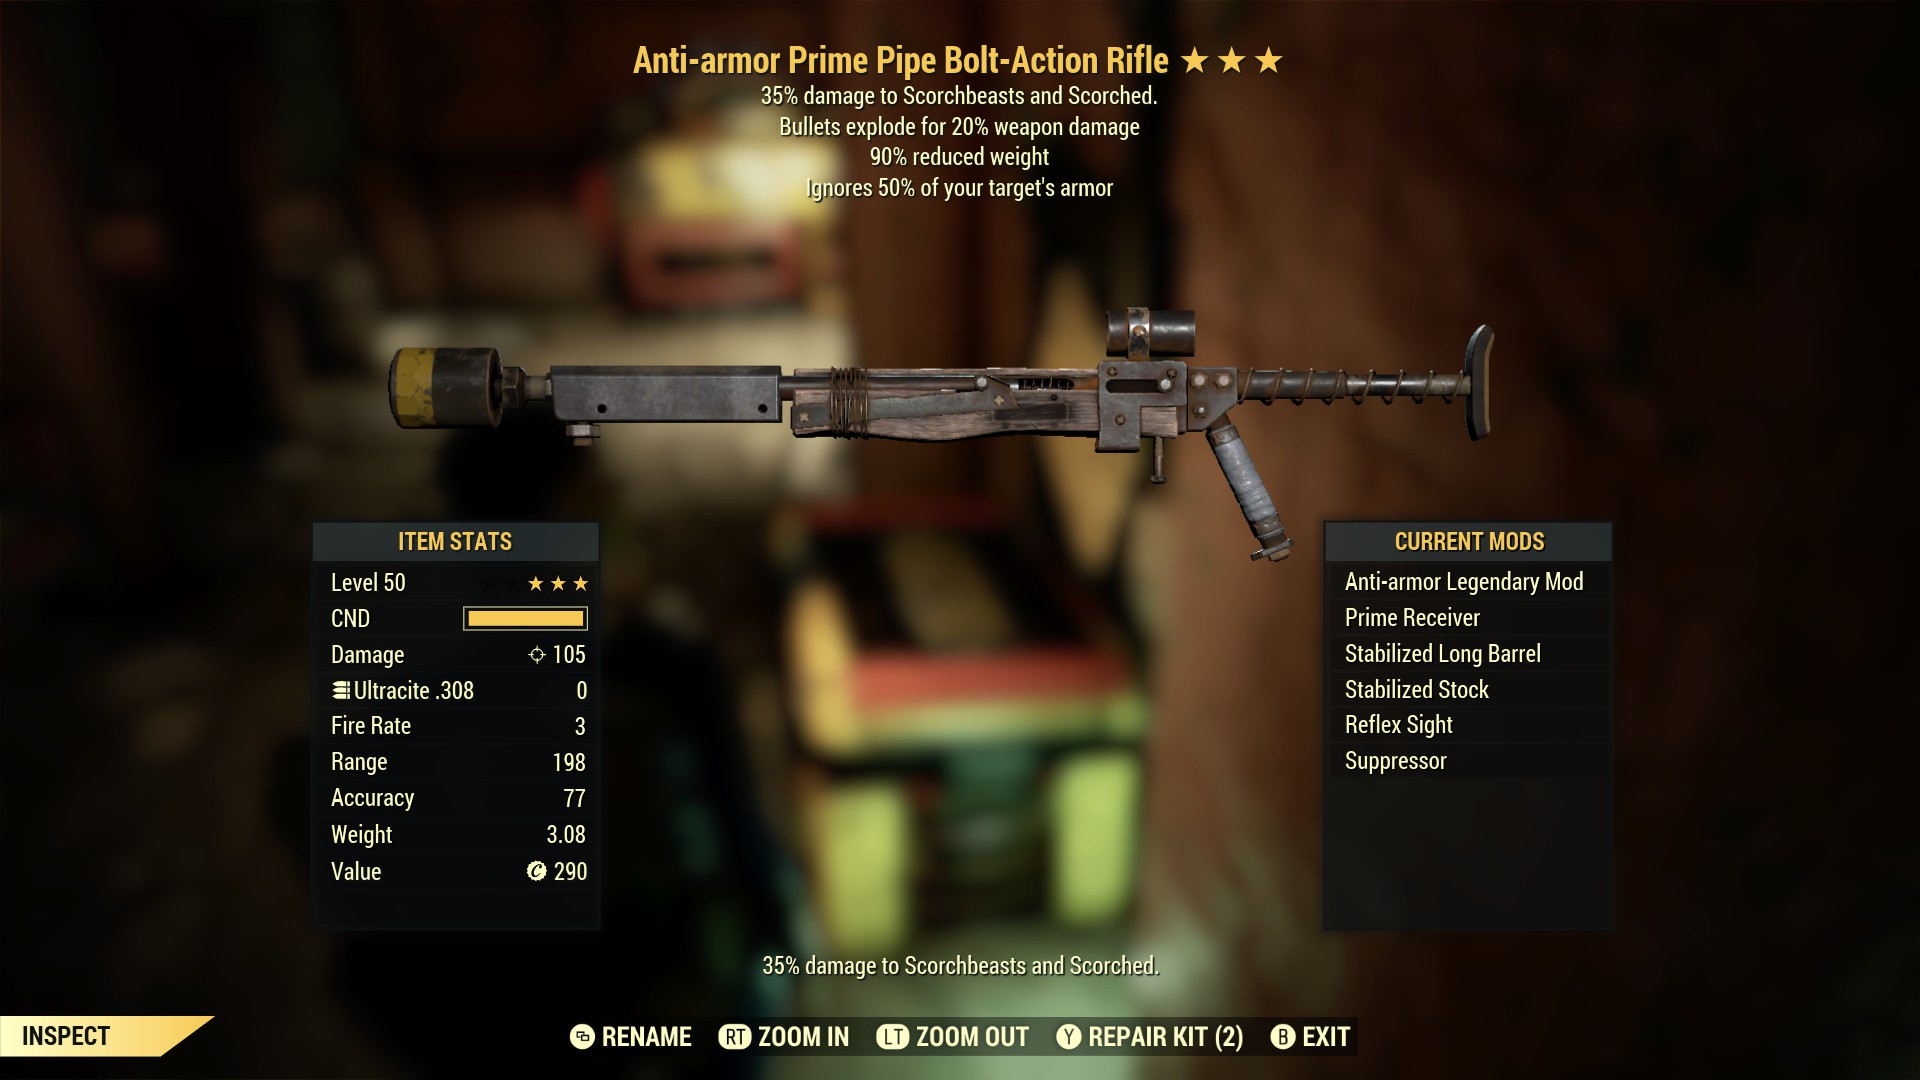 Anti-armor Prime Pipe Bolt-Action Rifle